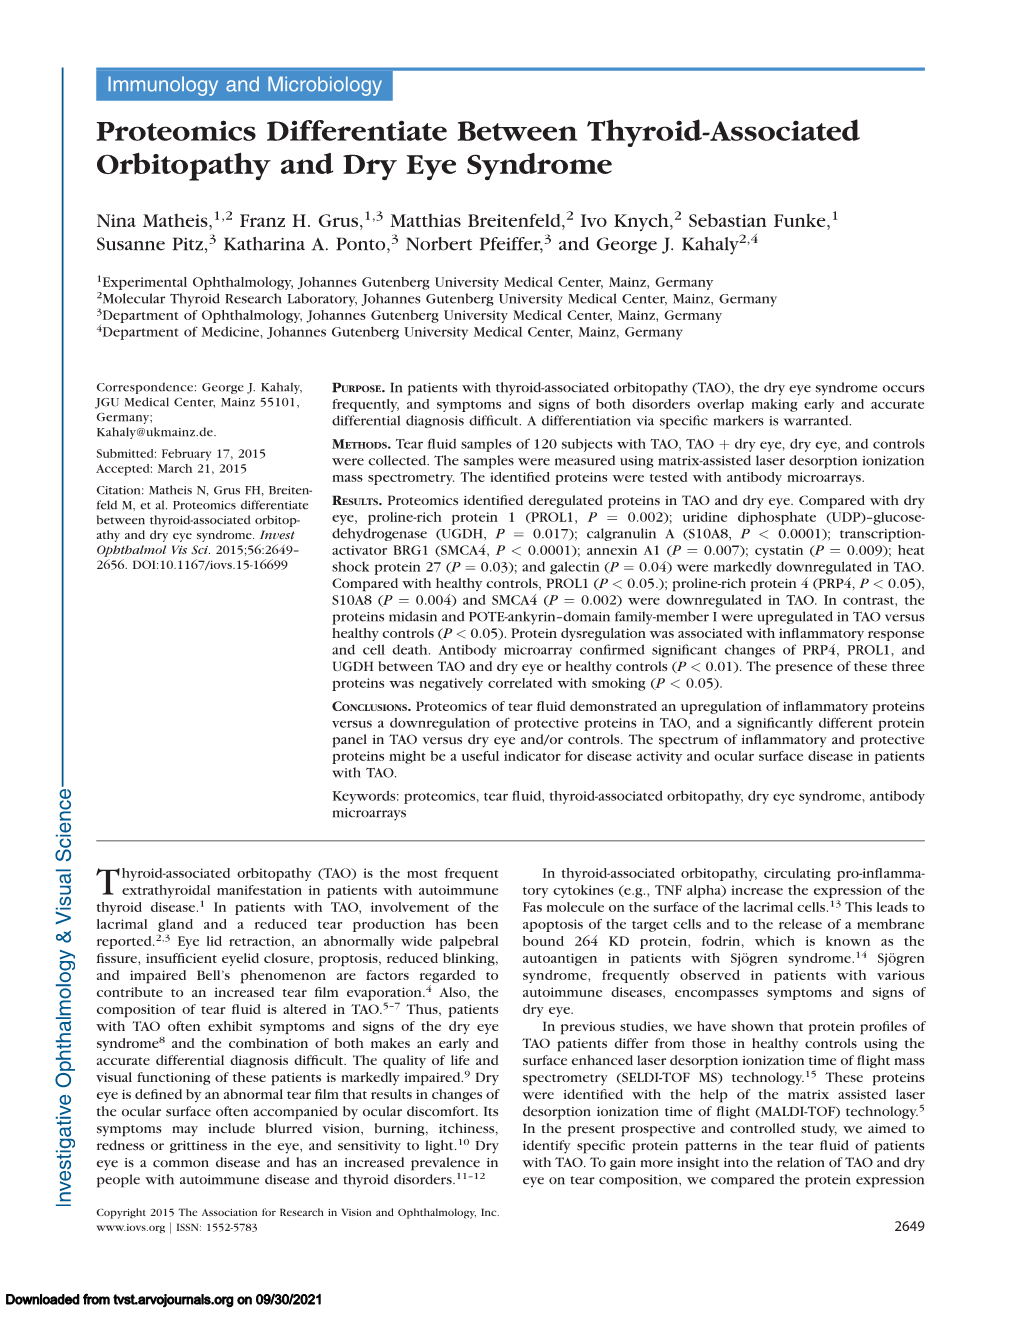 Proteomics Differentiate Between Thyroid-Associated Orbitopathy and Dry Eye Syndrome